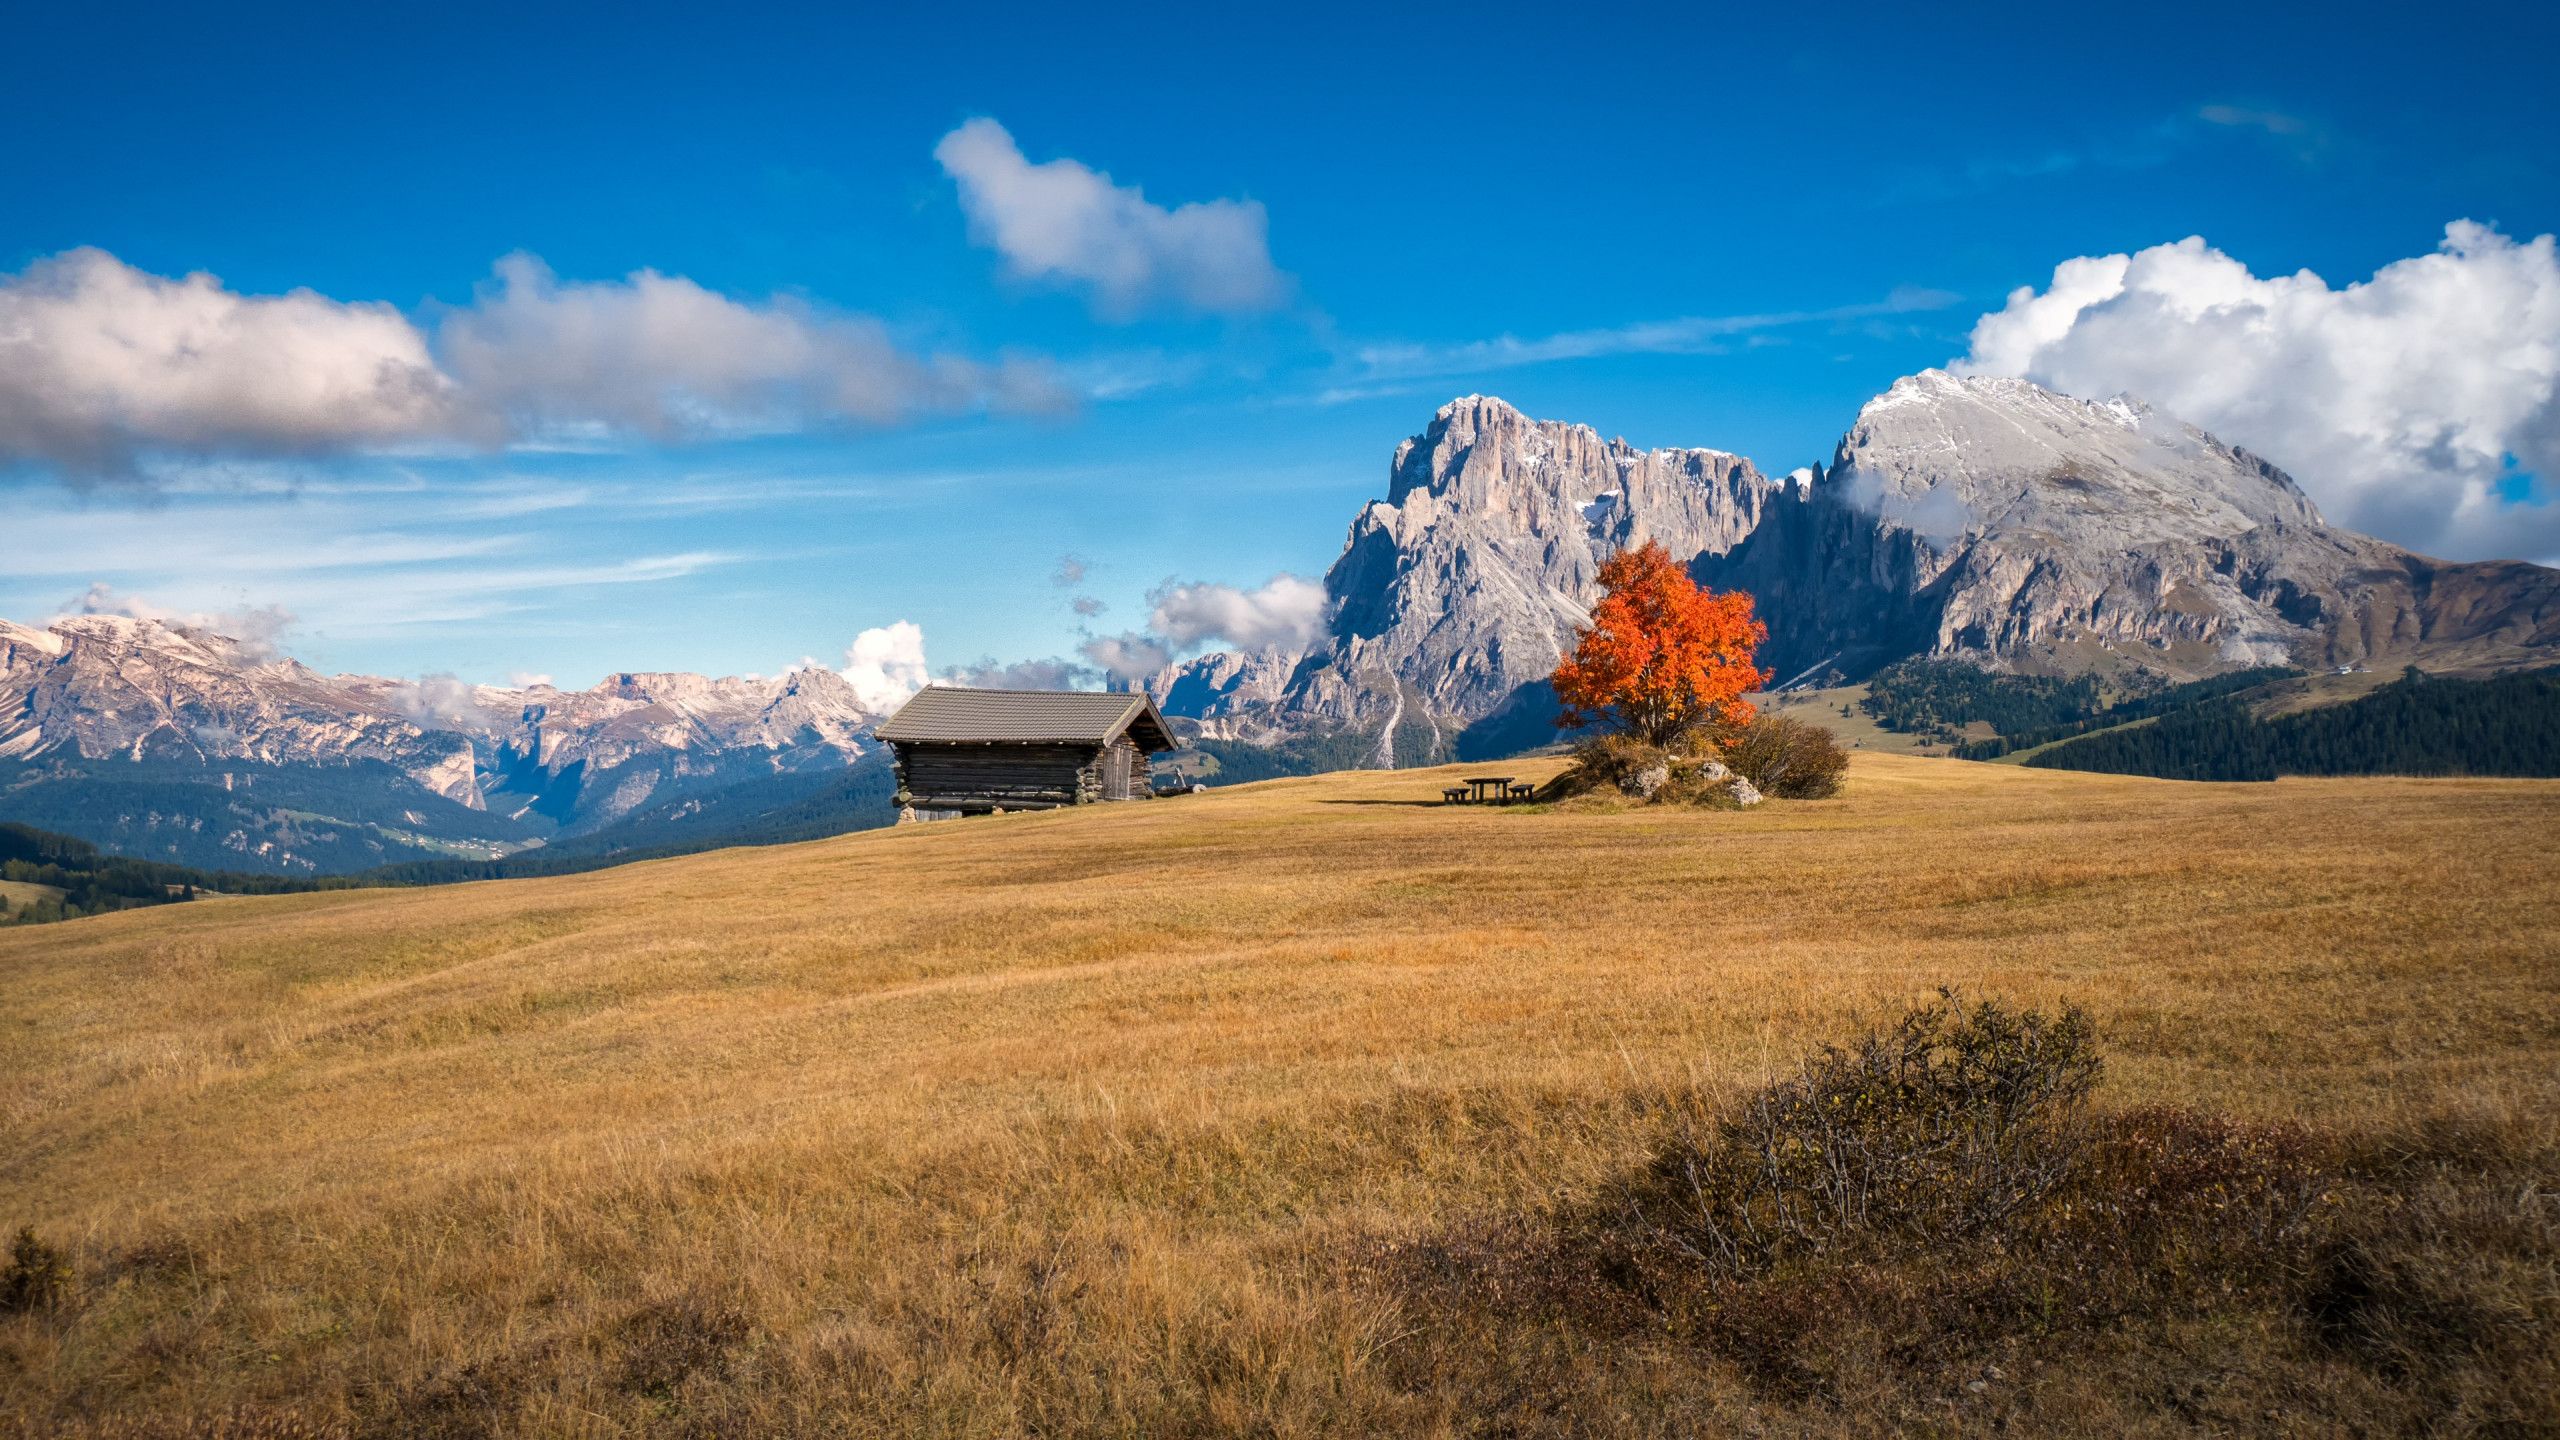 Download wallpaper: Perfect Autumn landscape from South Tyrol 2560x1440